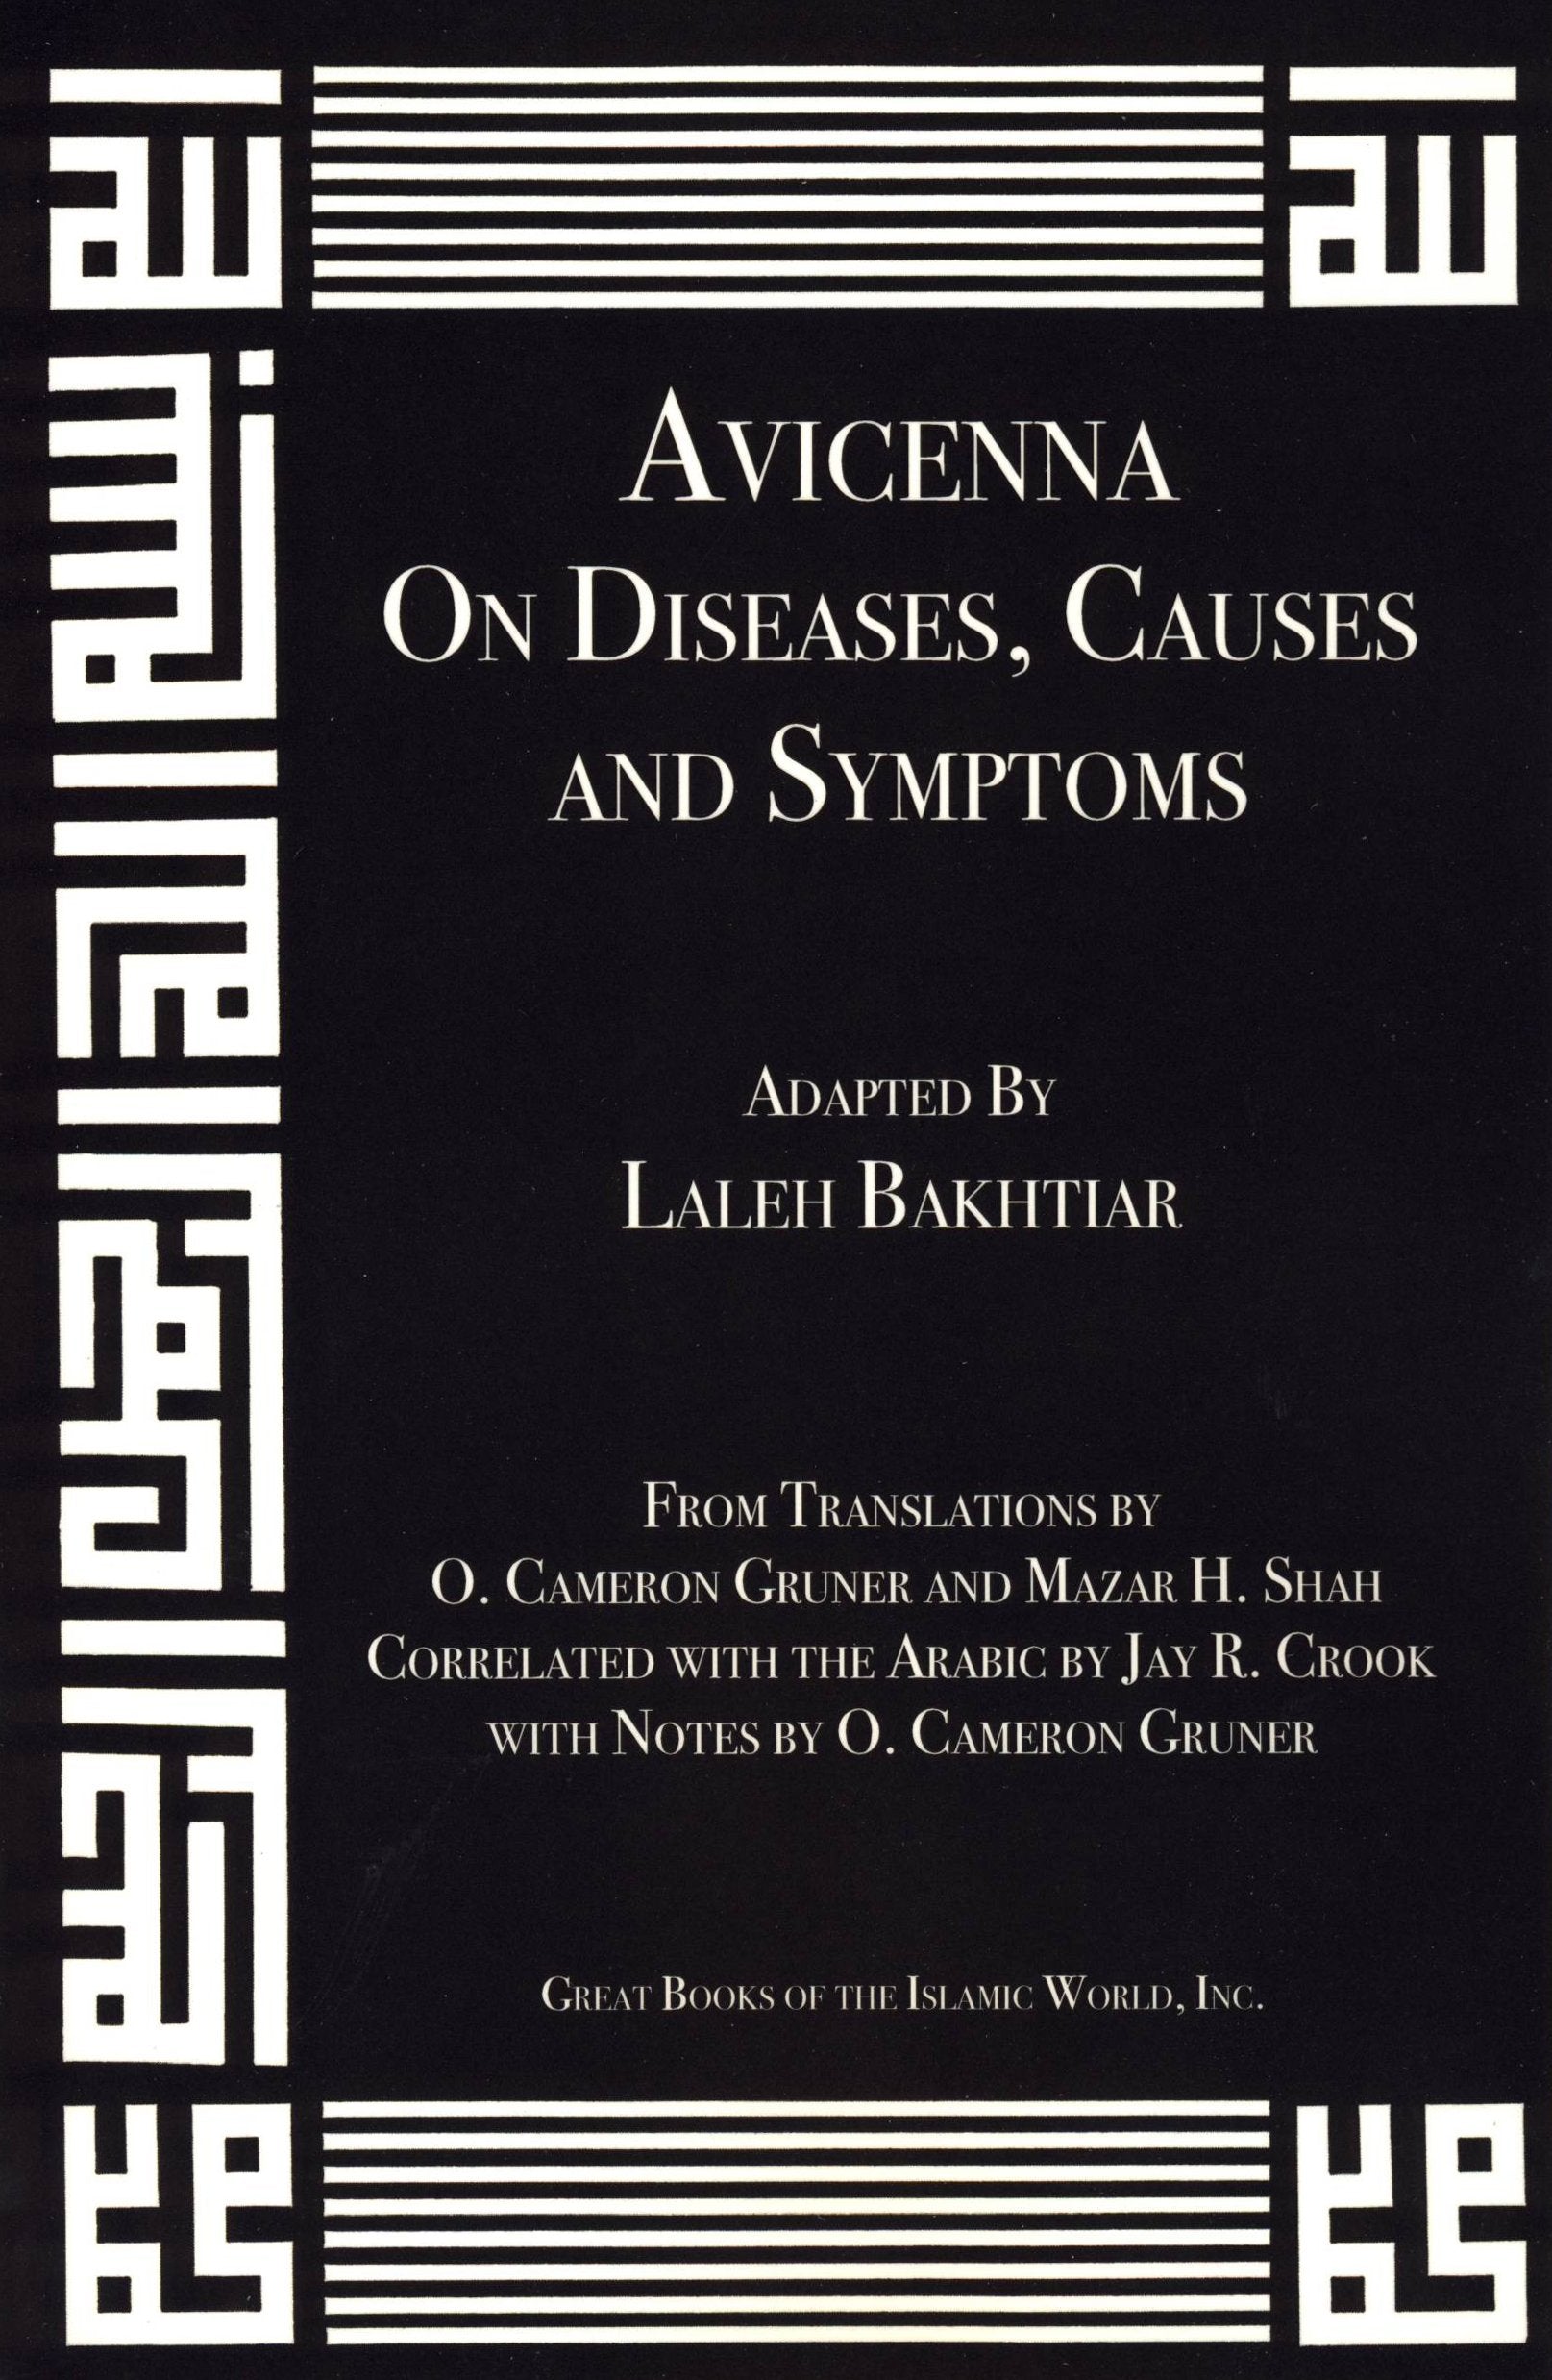 Avicenna On Diseases, Causes and Symptoms